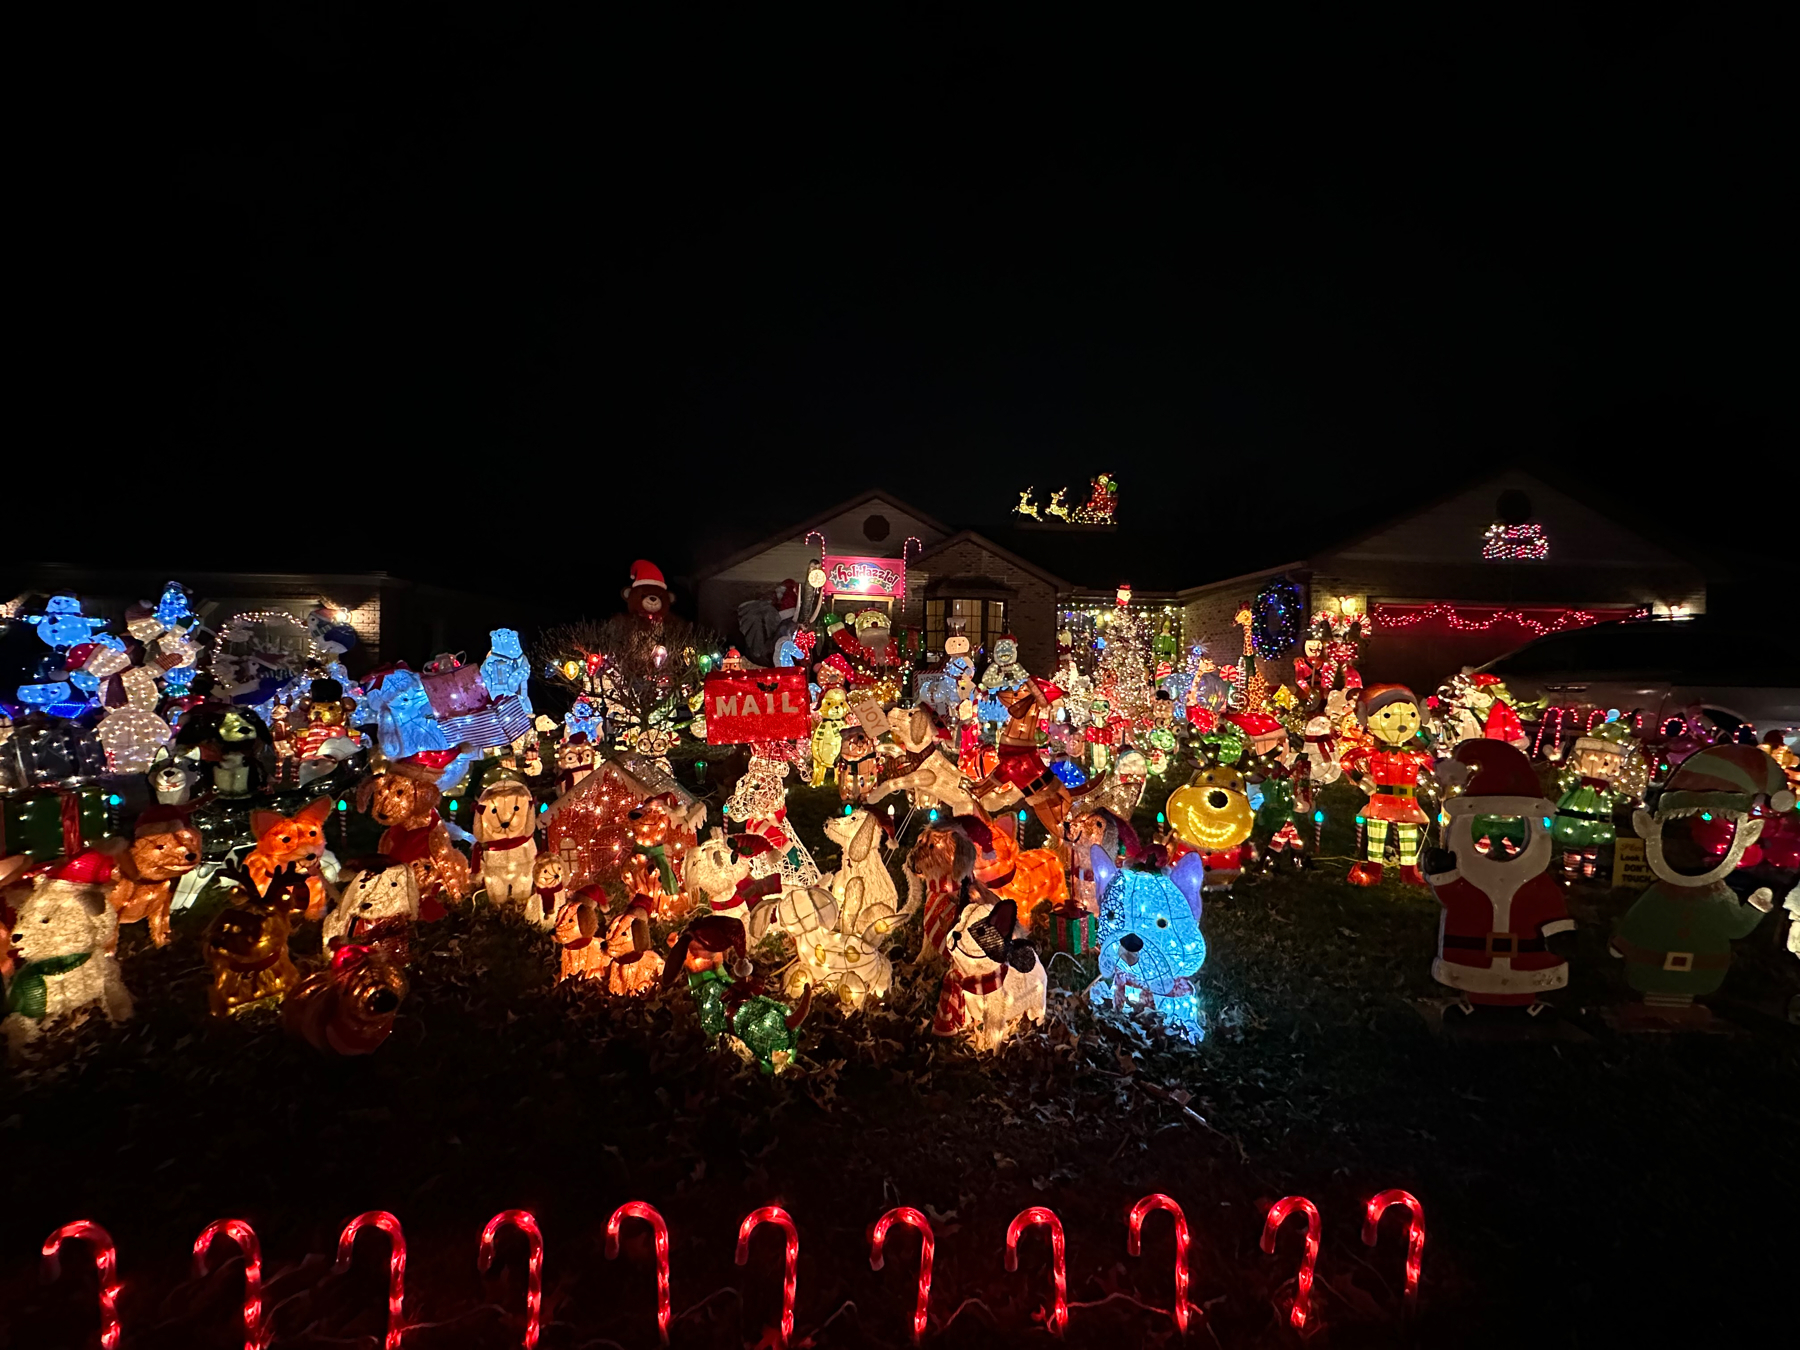 A house decorated with an extensive collection of illuminated and colorful Christmas yard decorations including inflatable figures, light-up animals and candy canes, and a rooftop display of Santa in his sleigh.